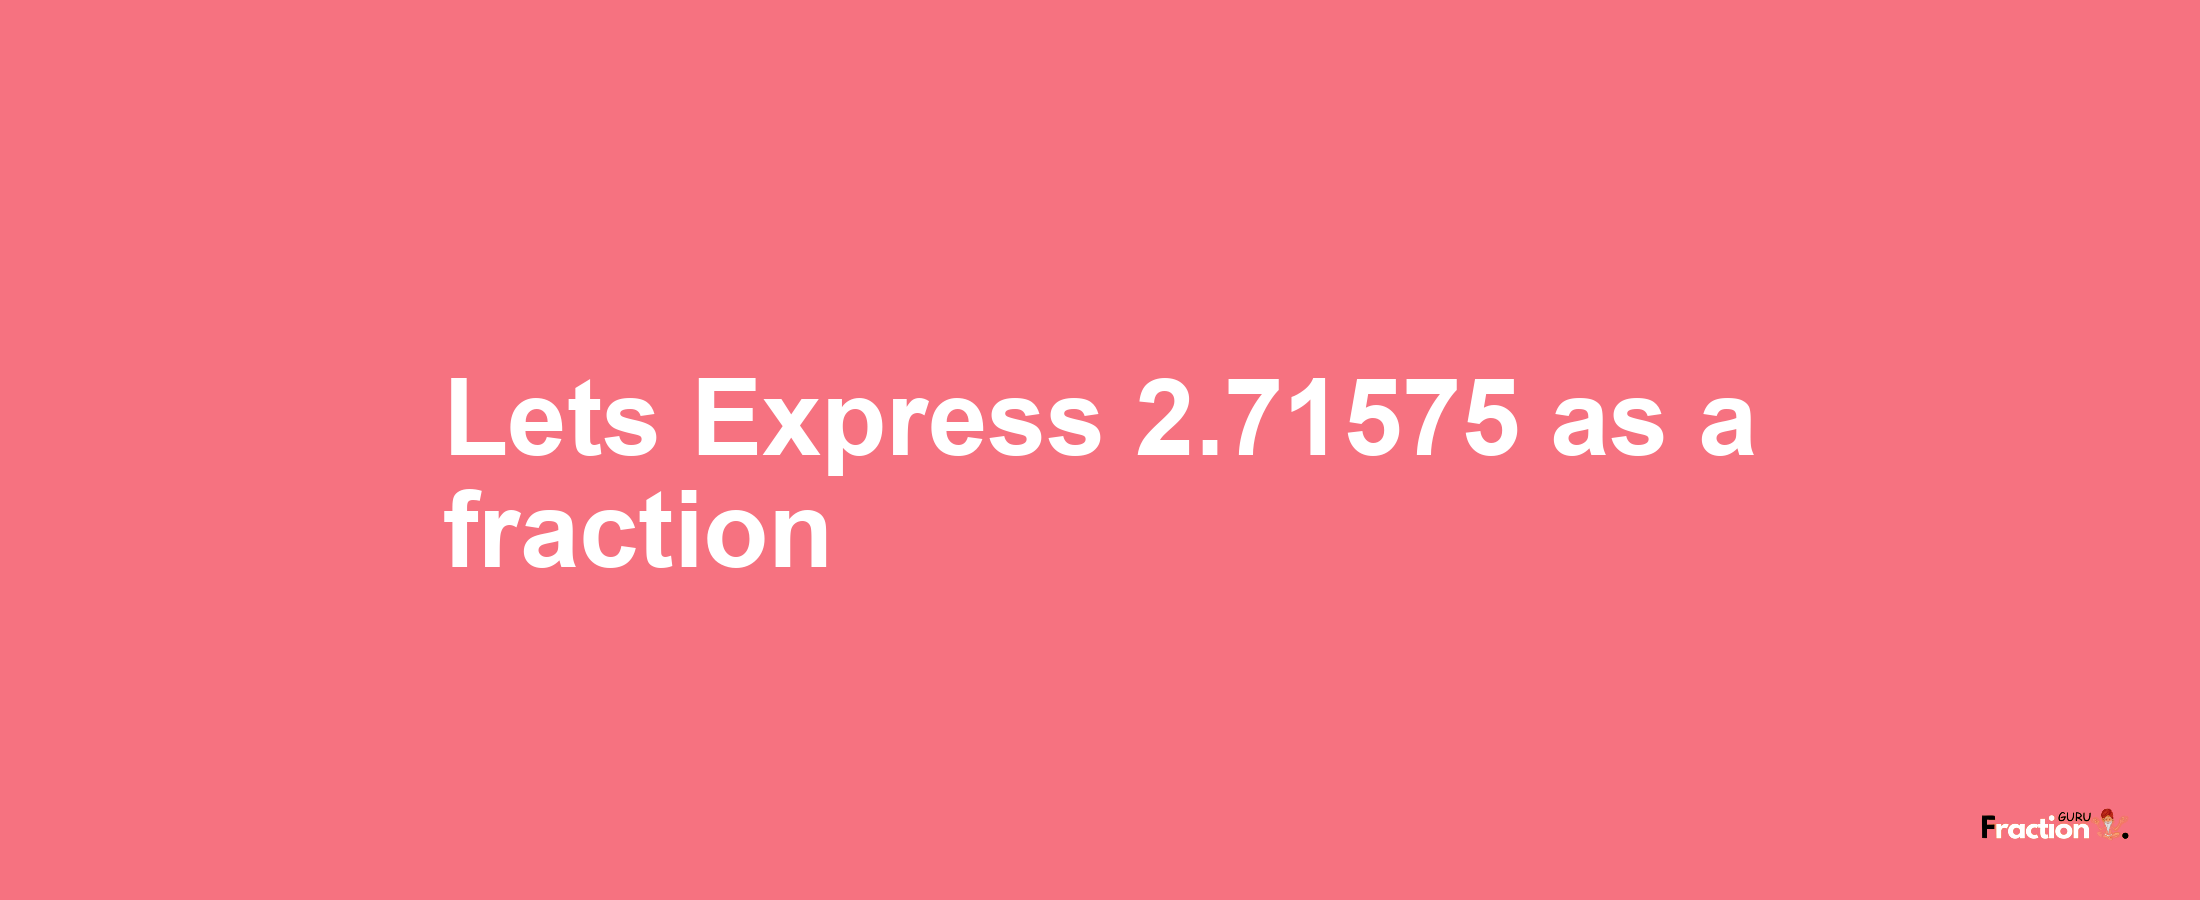 Lets Express 2.71575 as afraction